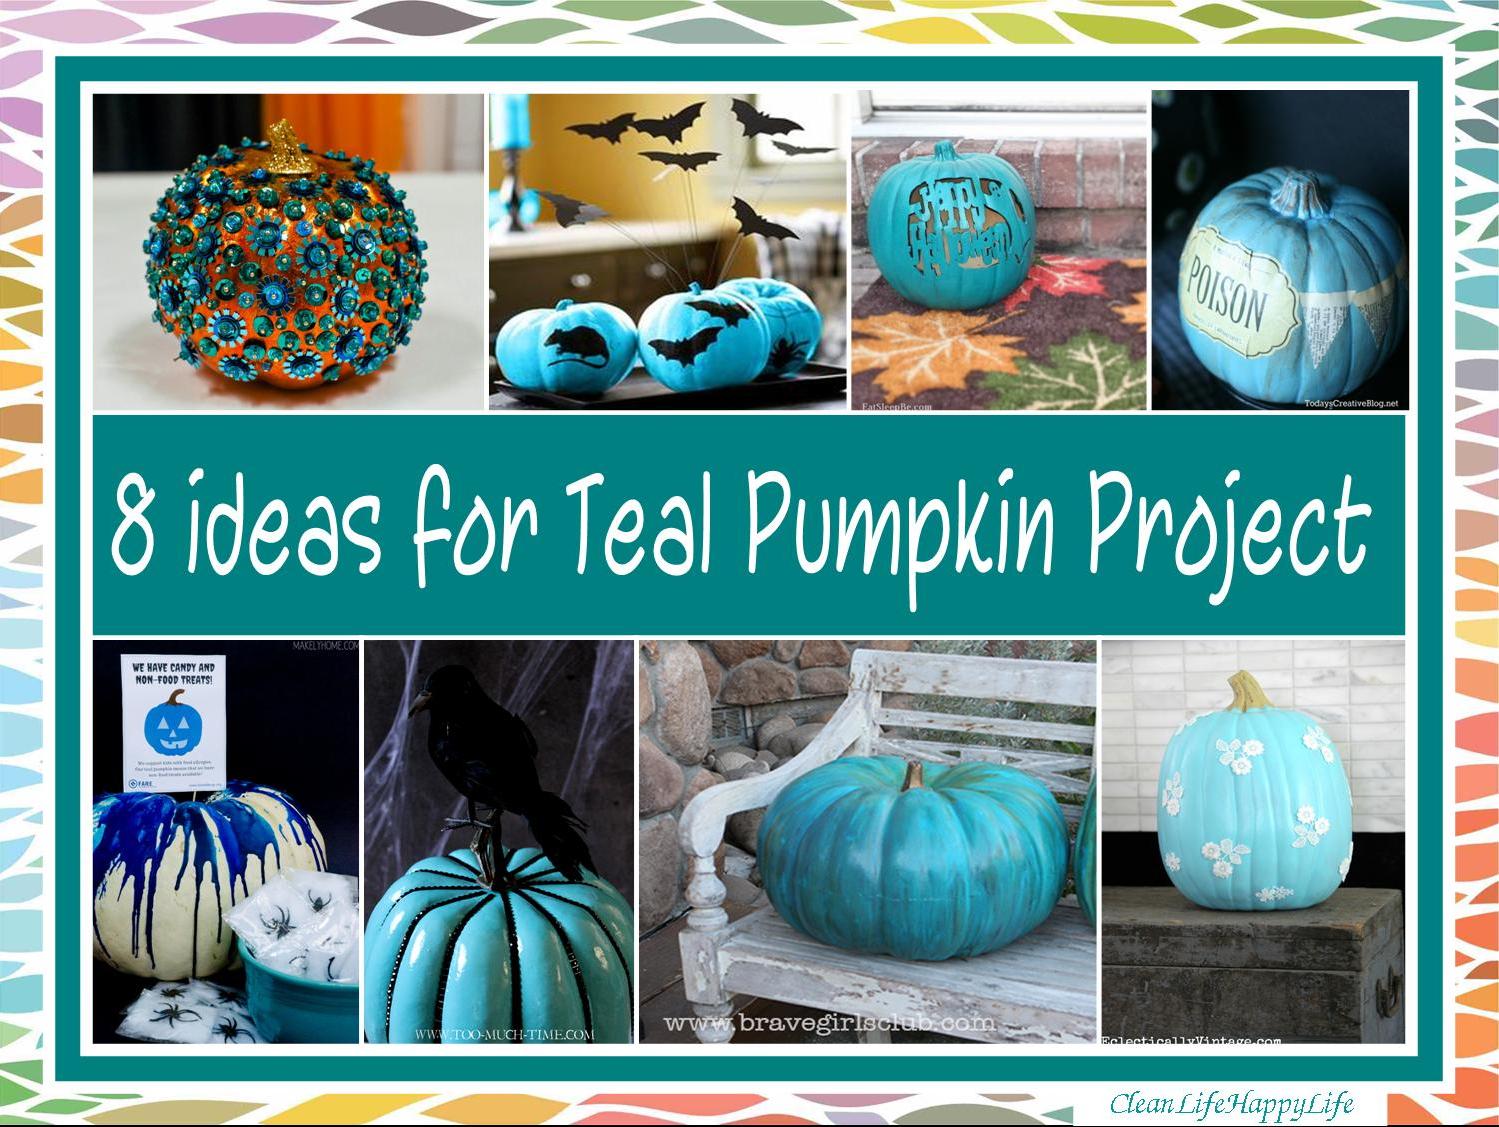 clean-life-happy-life-join-the-teal-pumpkin-project